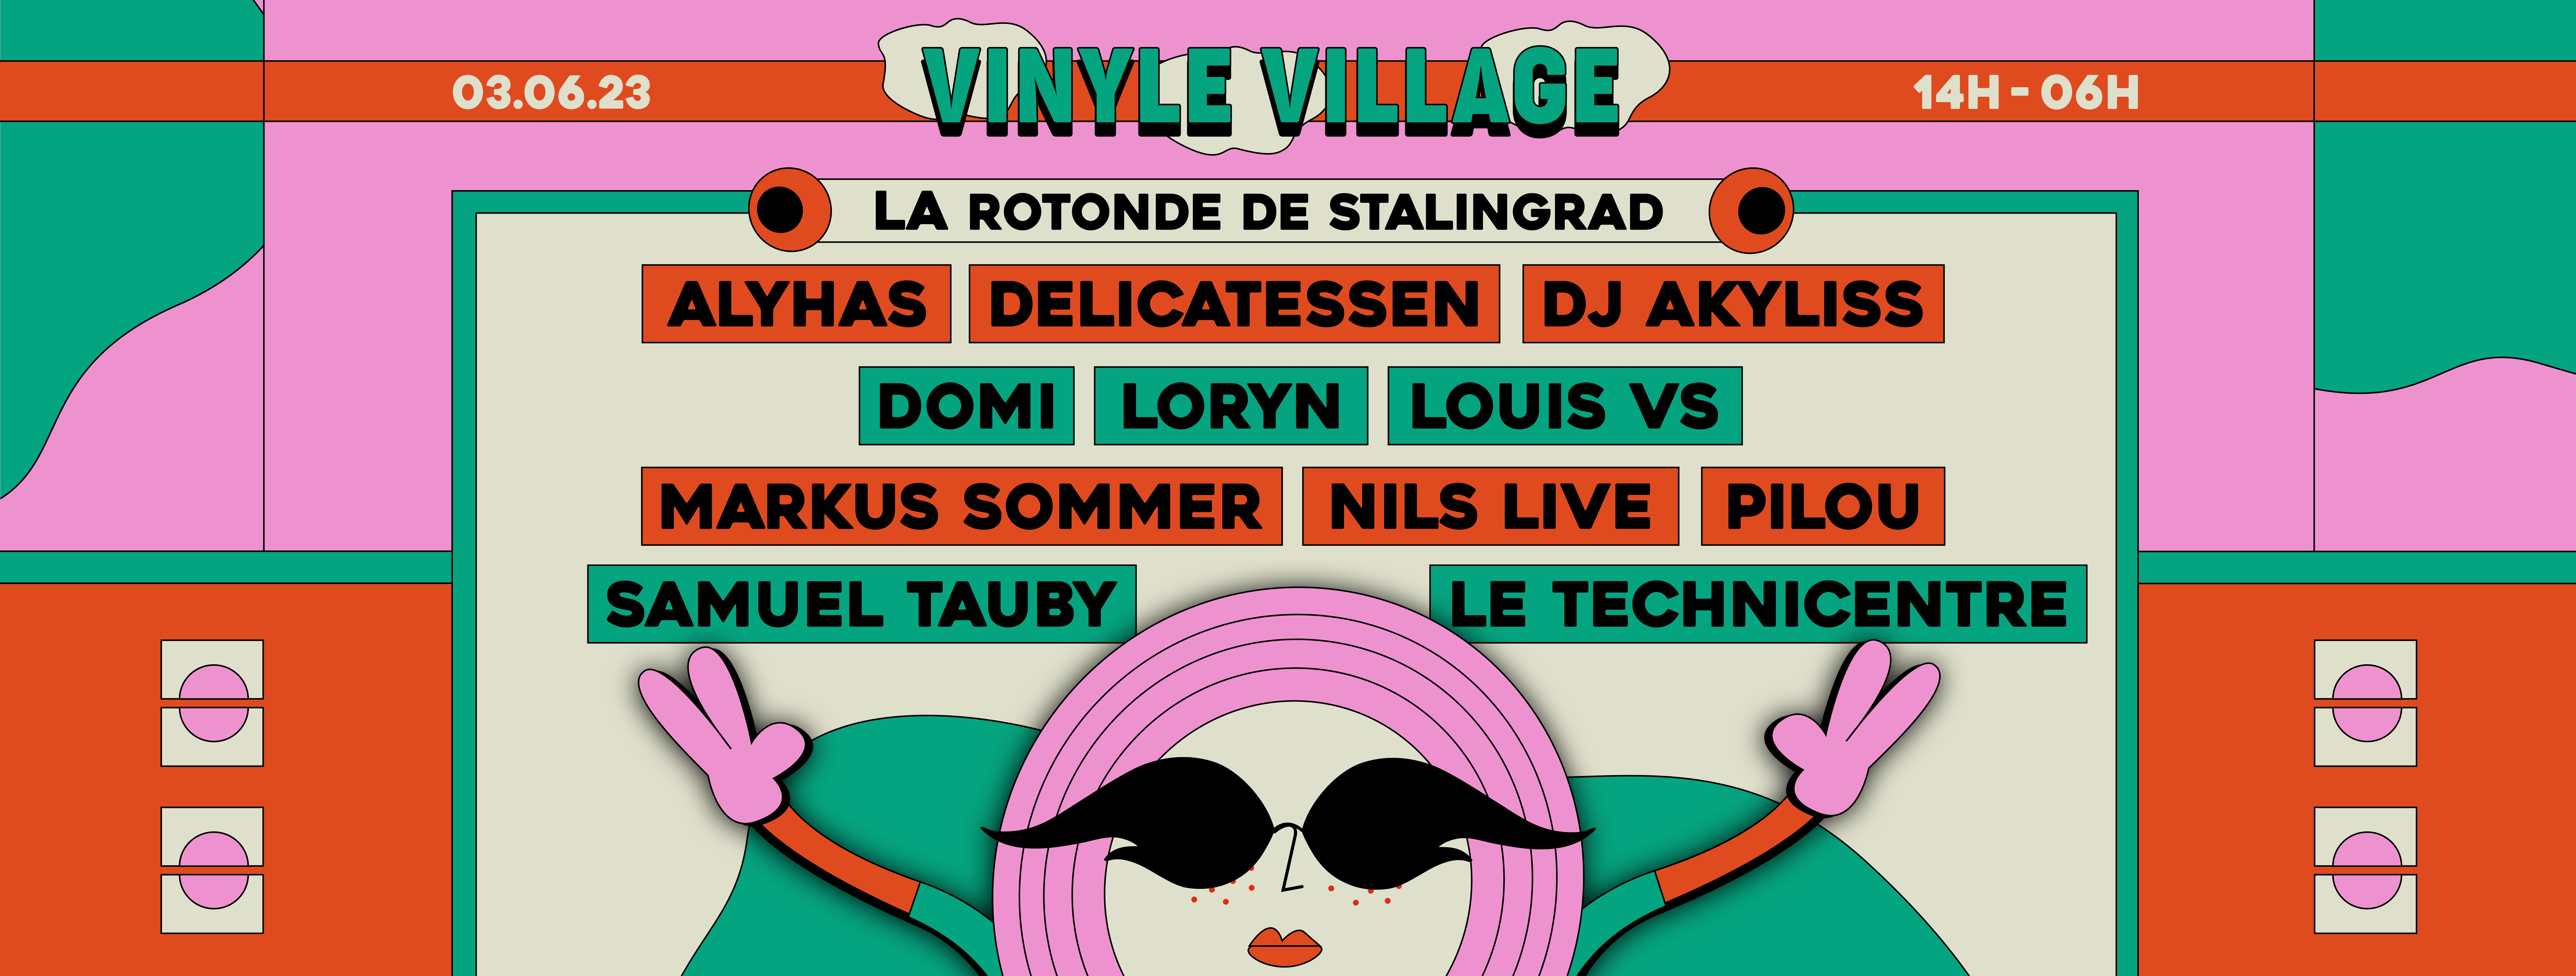 Vinyle Village House Of Skeud ⚘ Markus Sommer & More (Open Air + Club XXL) - フライヤー裏